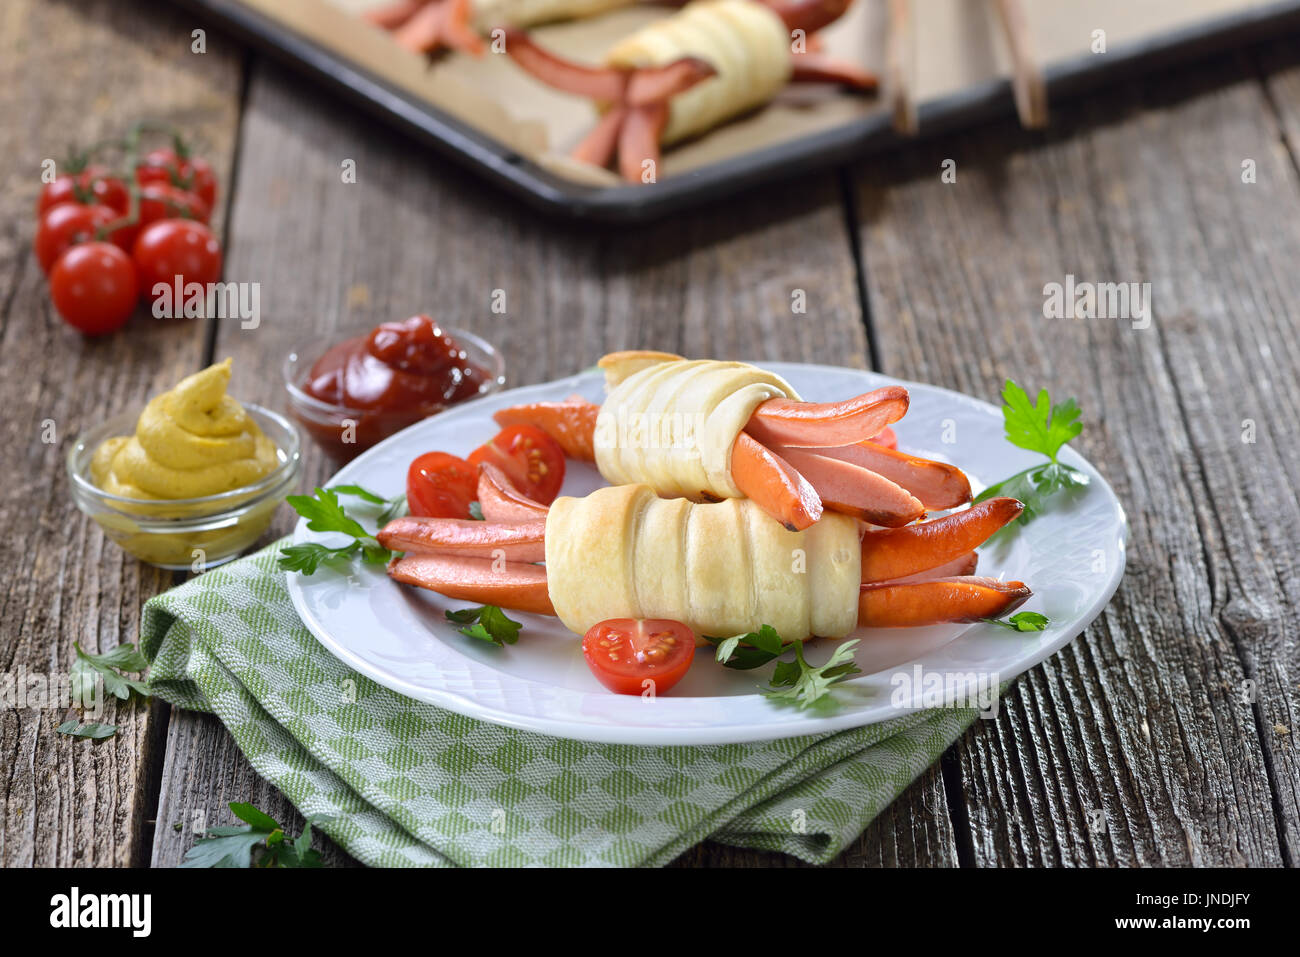 Baked Vienna sausages wrapped with puff pastry fresh from the oven, often served as a children’s meal Stock Photo